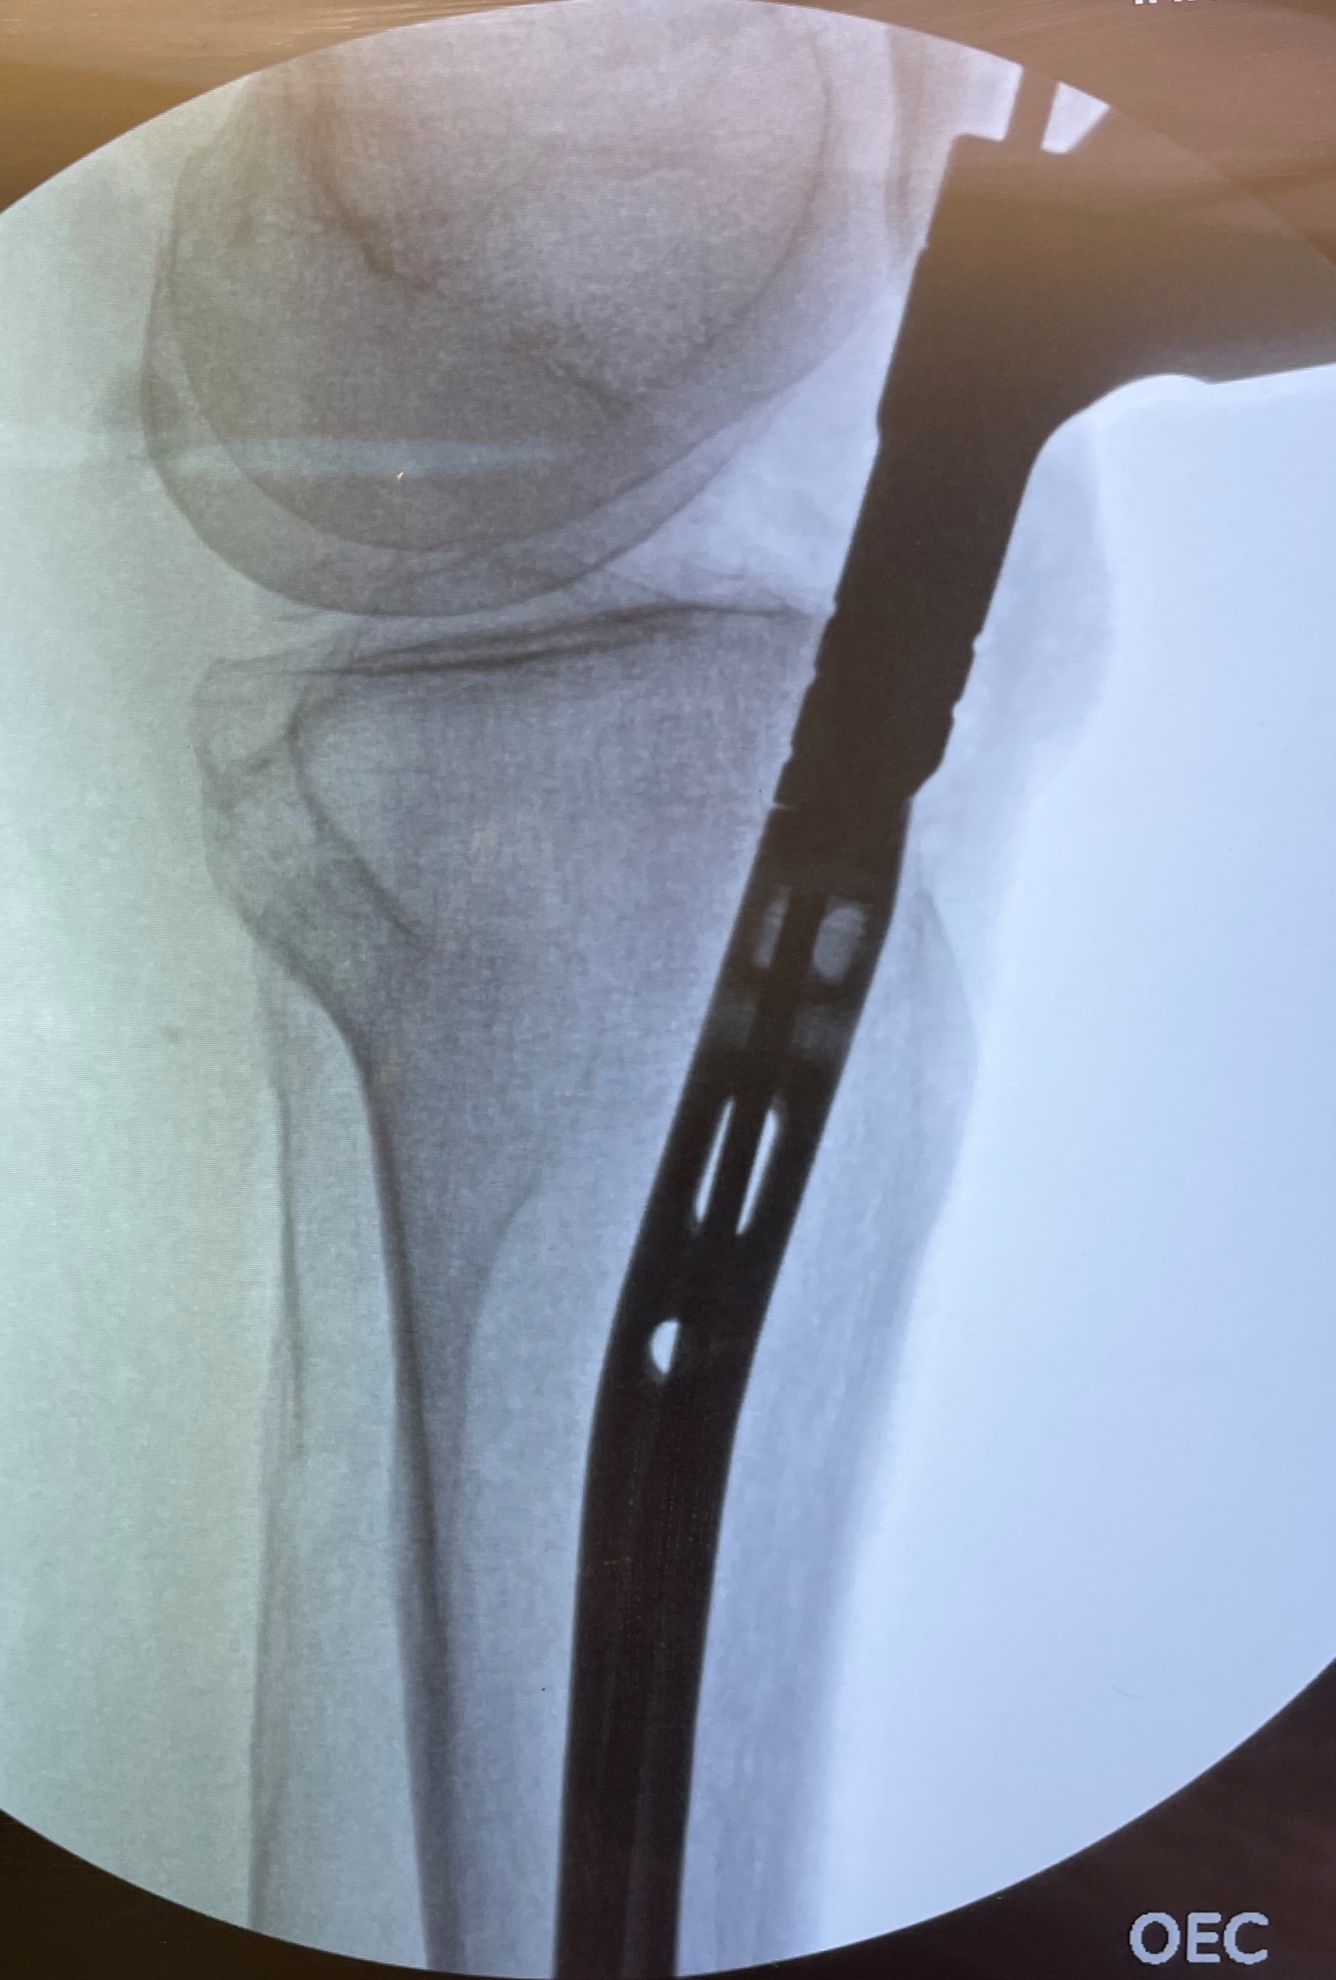 Wound complications, infections and nonunions do not increase with open  reduction of tibia shaft fractures treated with intramedullary devices |  Published in Journal of Orthopaedic Experience & Innovation